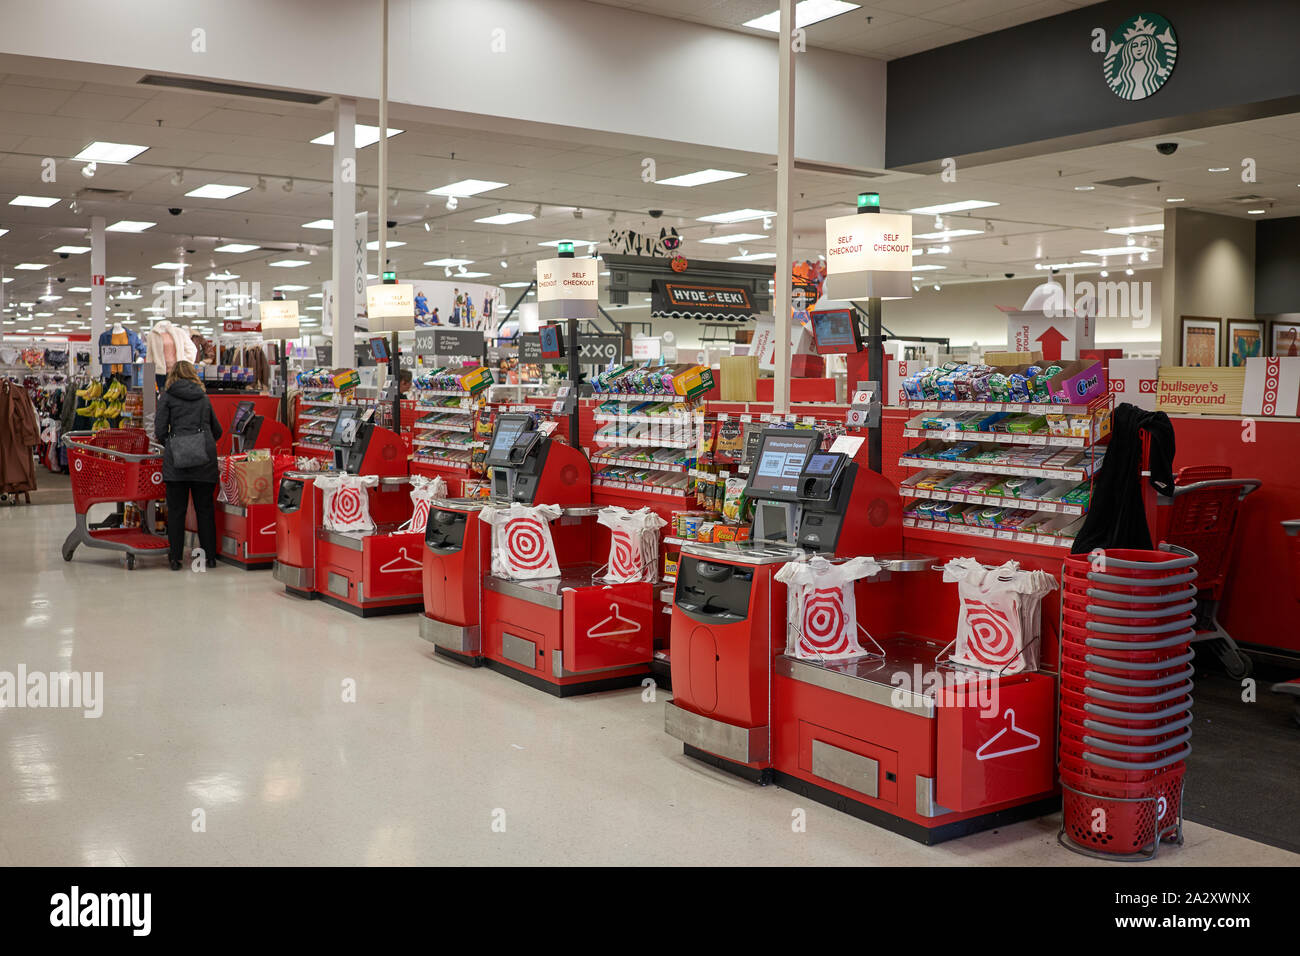 The Self Checkout area in a Target Store in Tigard, Oregon, seen on Wednesday, Sep 18, 2019. Stock Photo